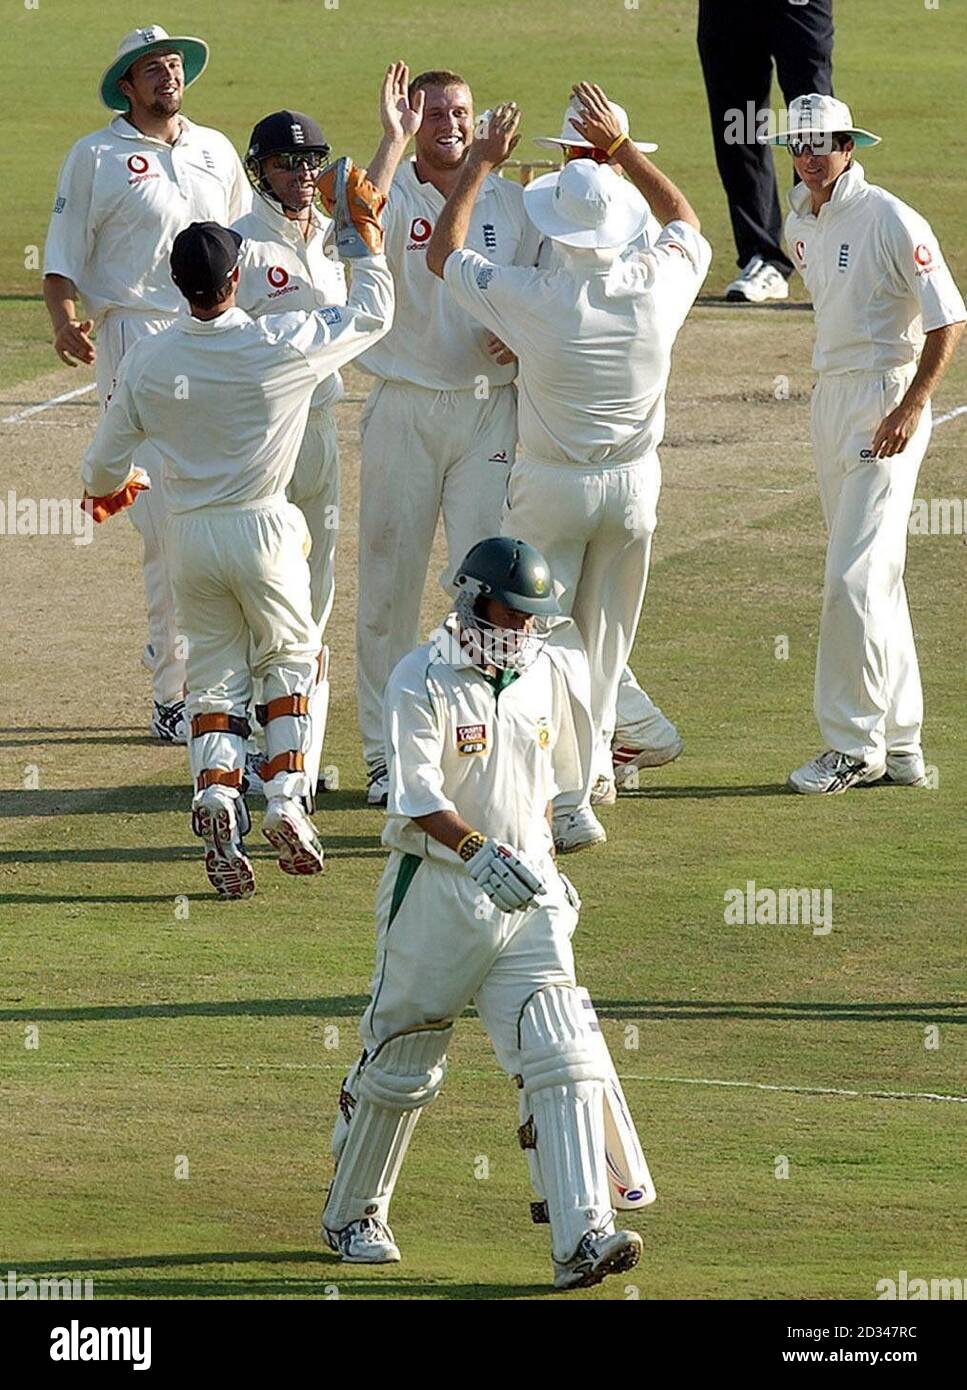 England's Andrew Flintoff (top centre) celebrates with his team mates (facing, from left) Stephen Harmison, Graham Thorpe and captain Michael Vaughan after bowling South Africa's Andrew Hall (bottom) for 9 runs. Stock Photo